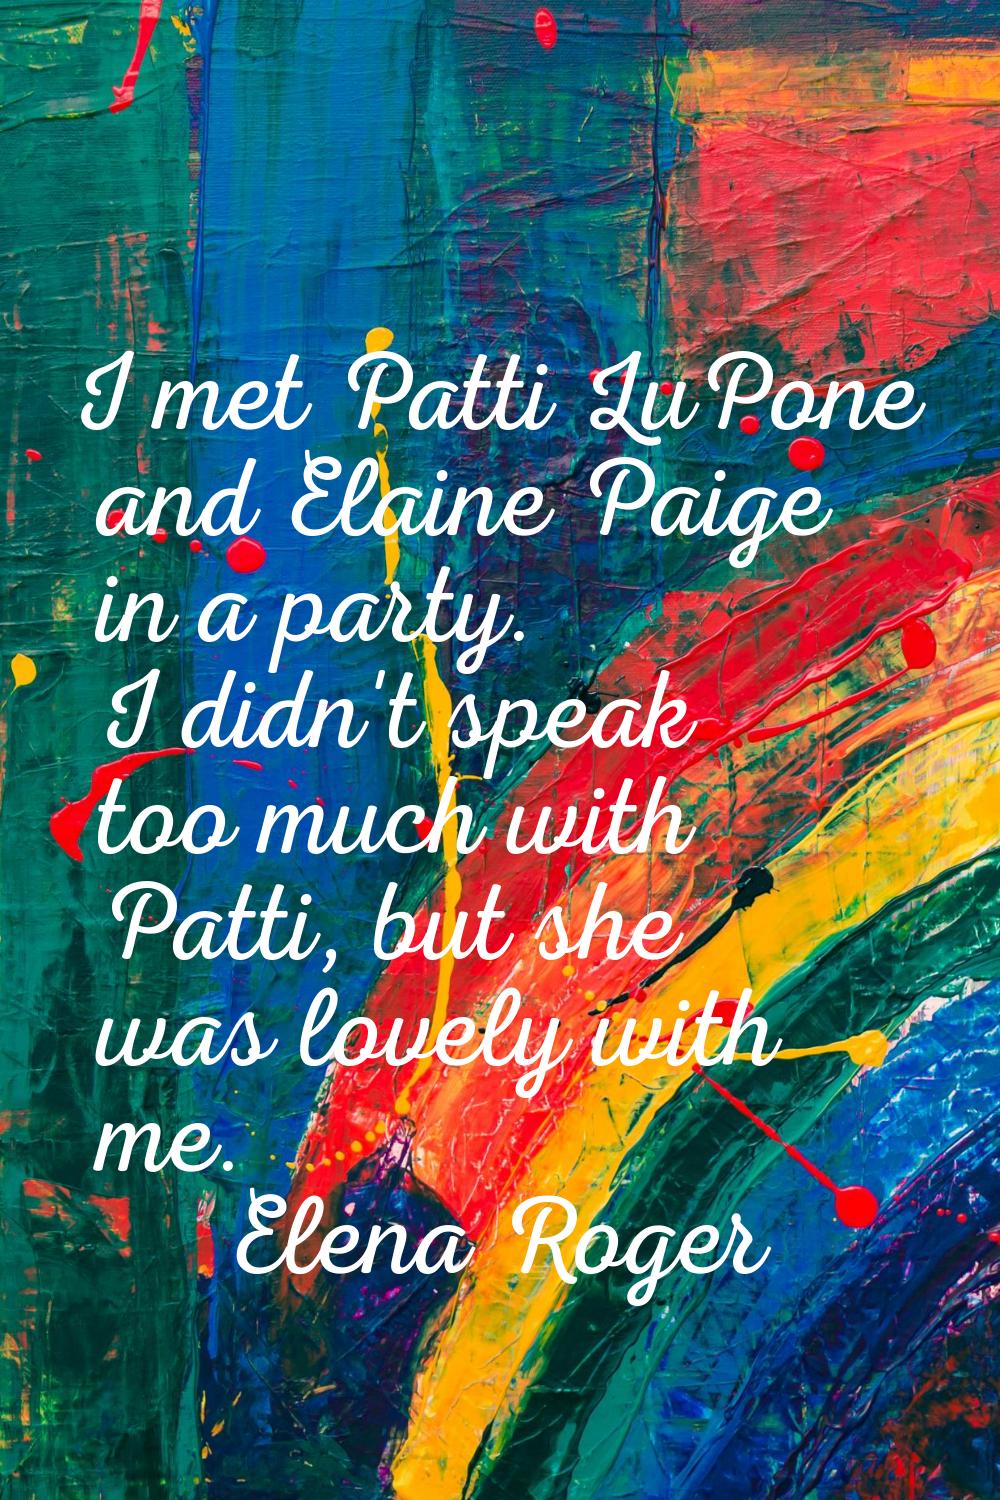 I met Patti LuPone and Elaine Paige in a party. I didn't speak too much with Patti, but she was lov